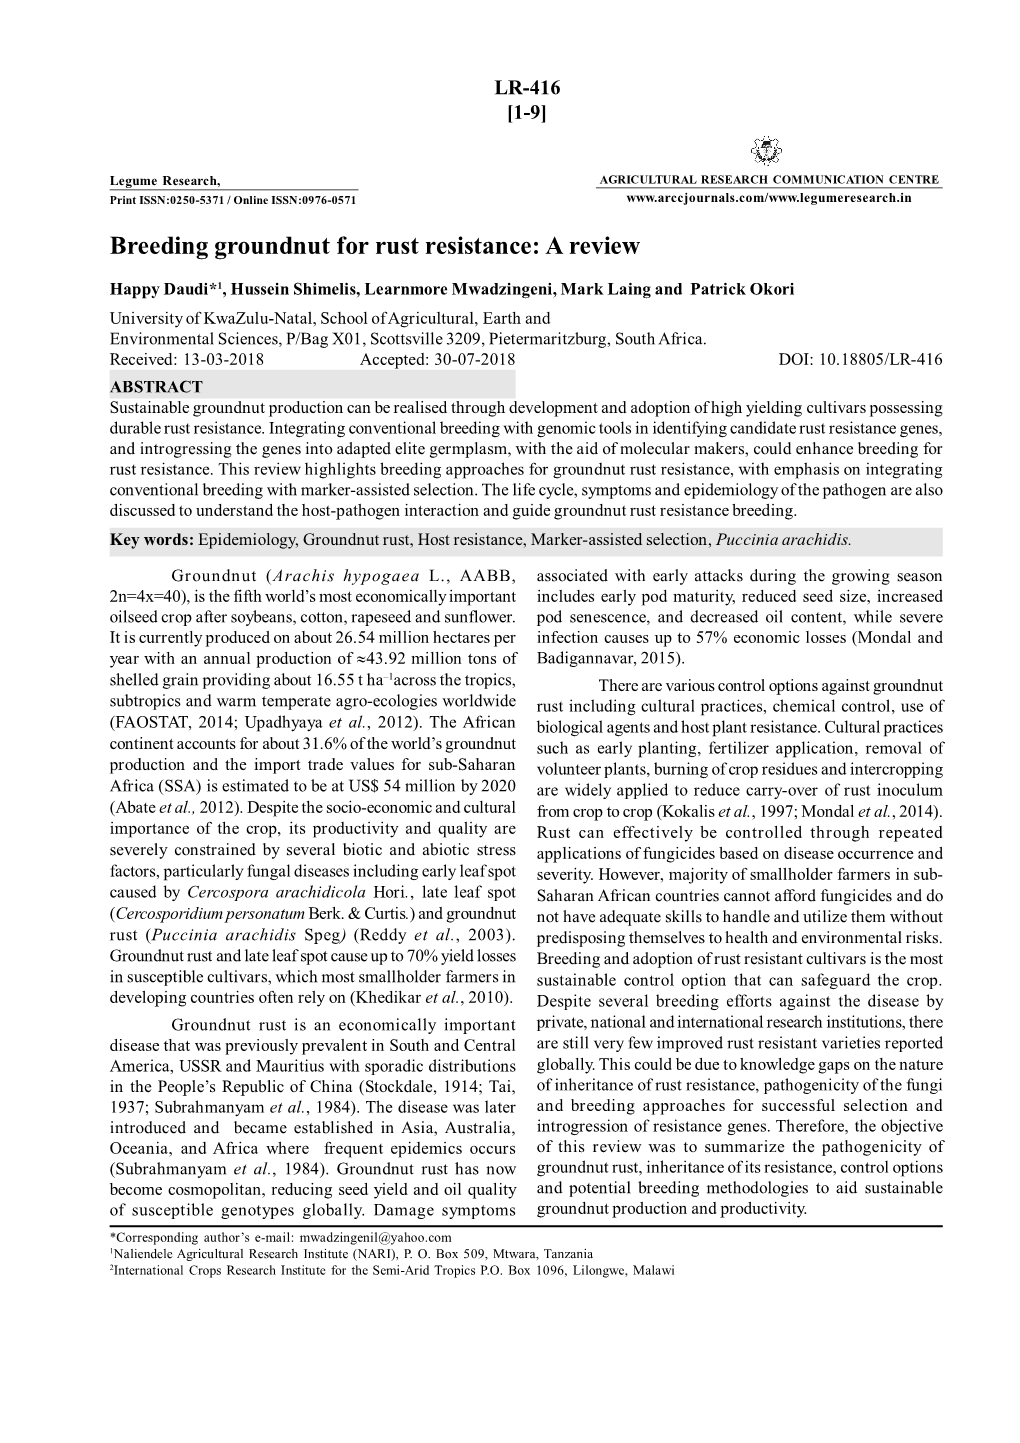 Breeding Groundnut for Rust Resistance: a Review